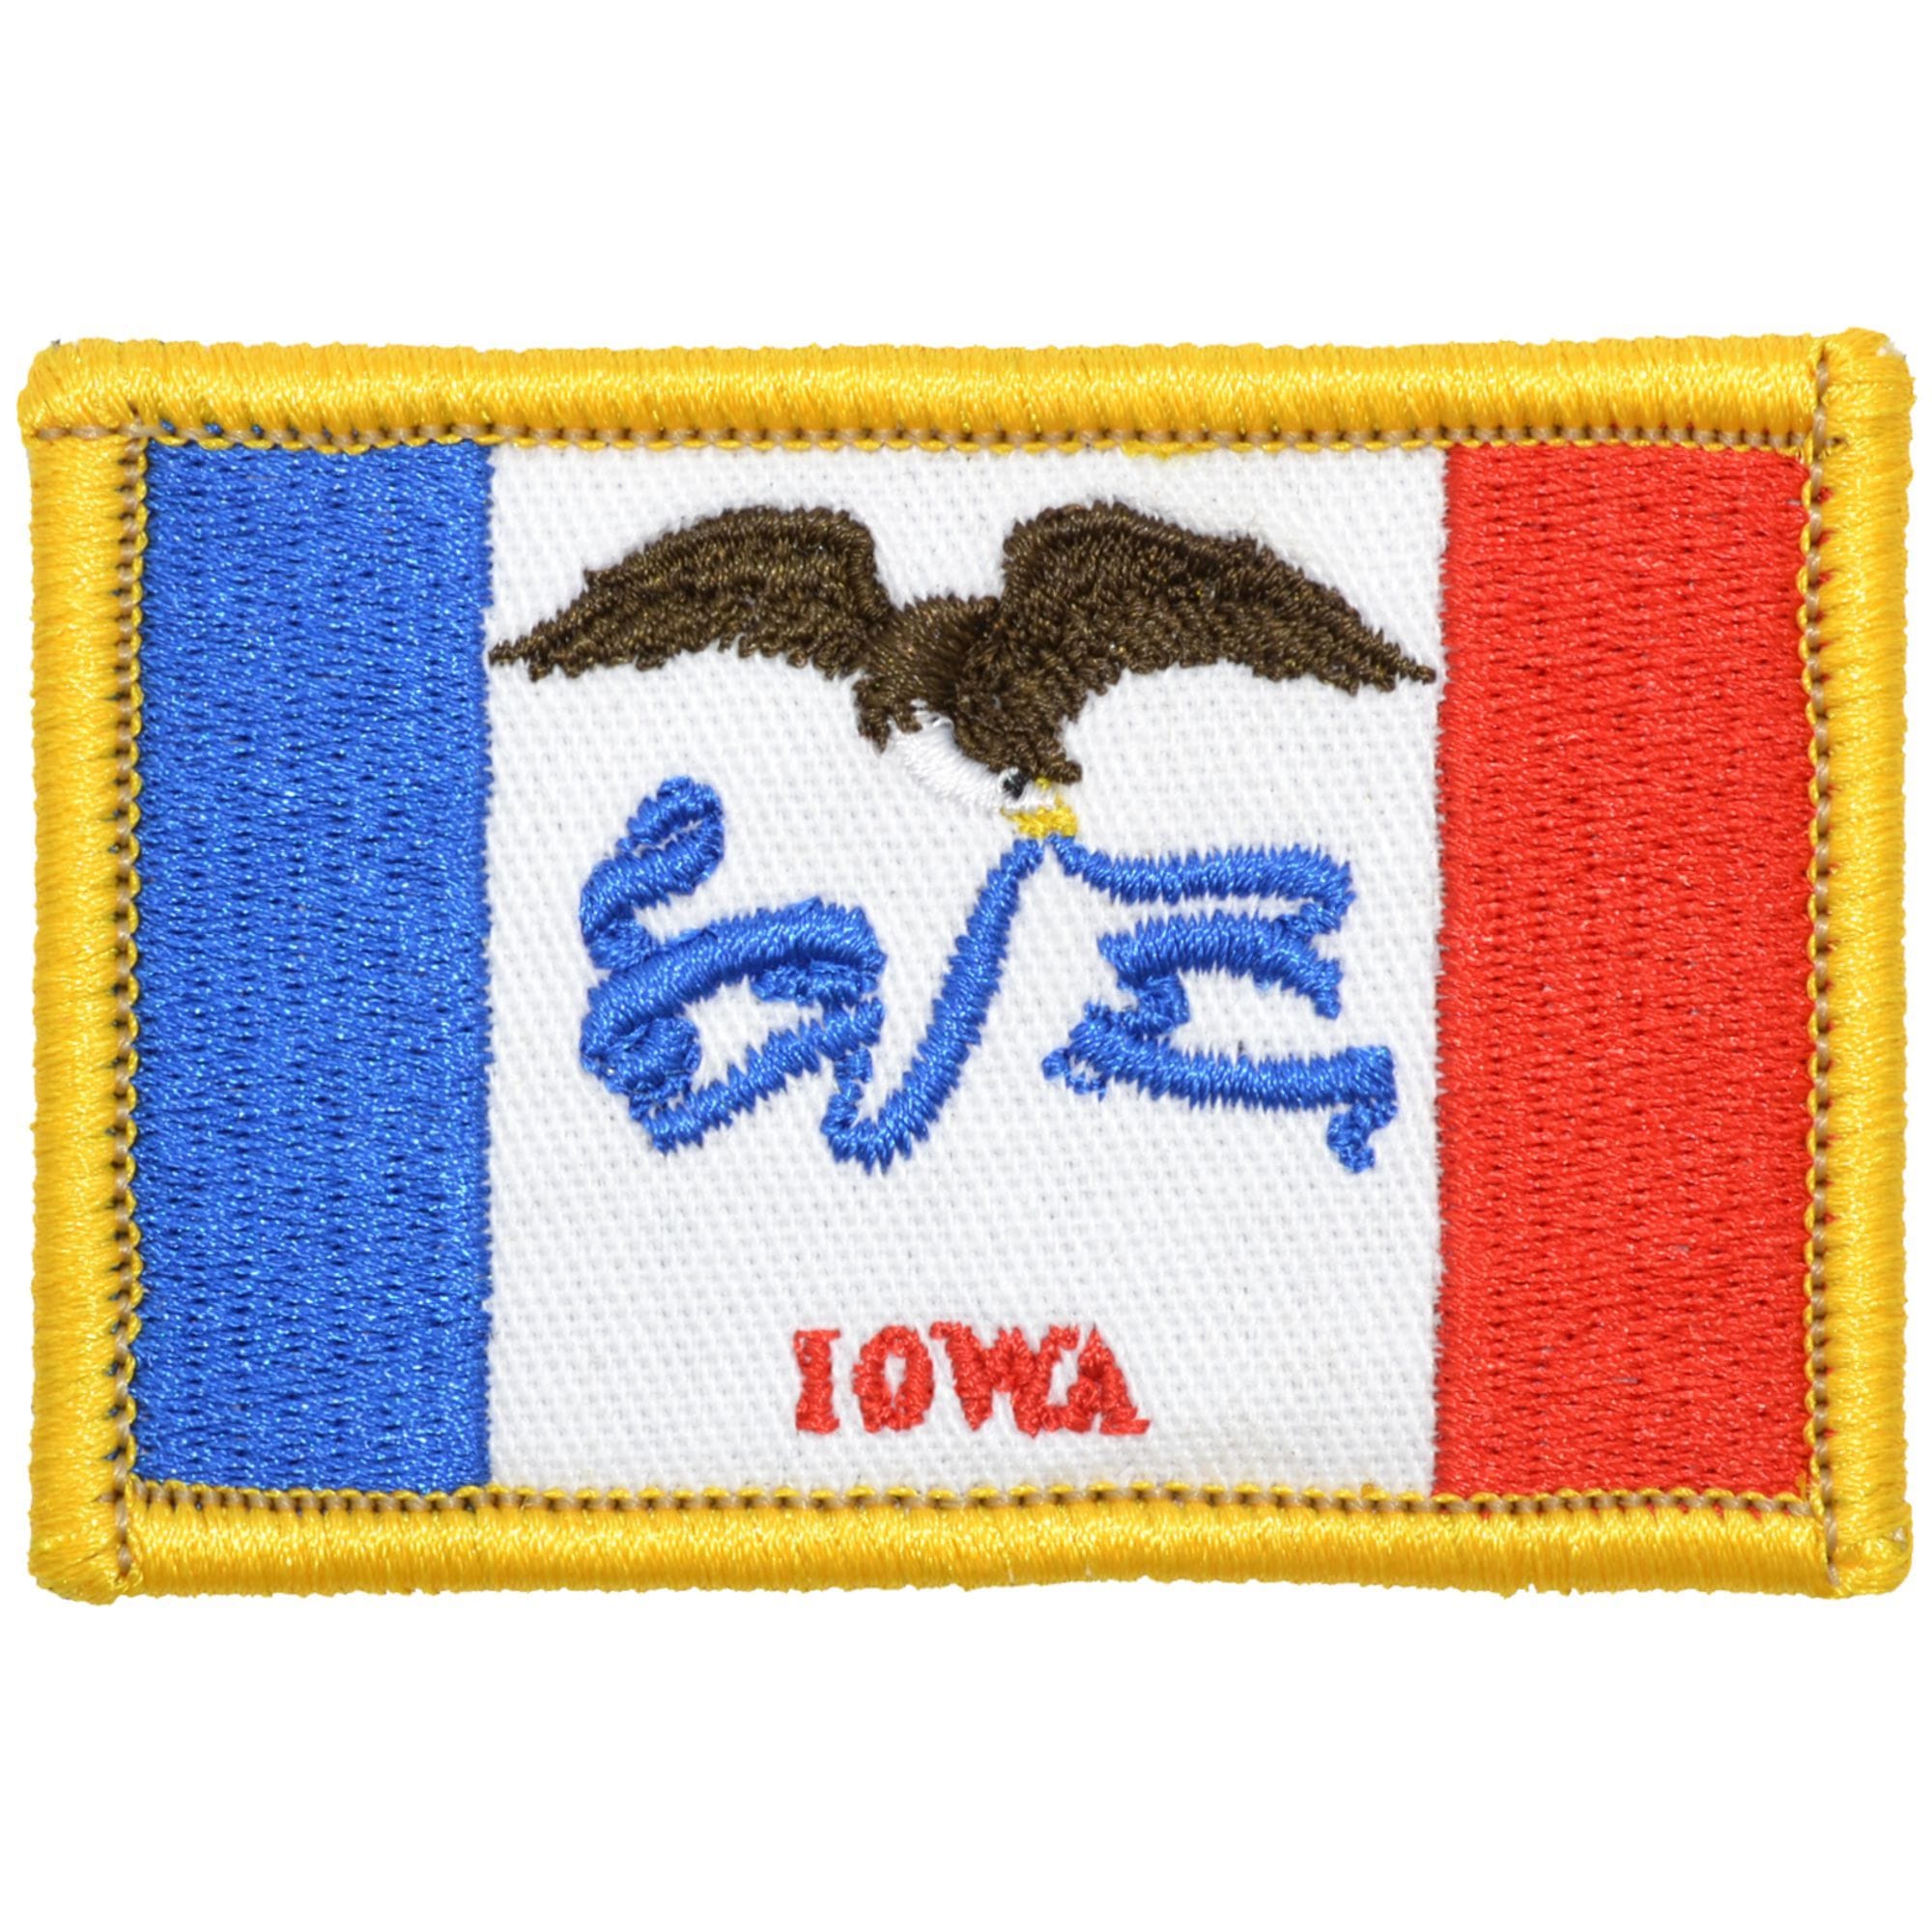 Tactical Gear Junkie Patches Full Color Iowa State Flag - 2x3 Patch